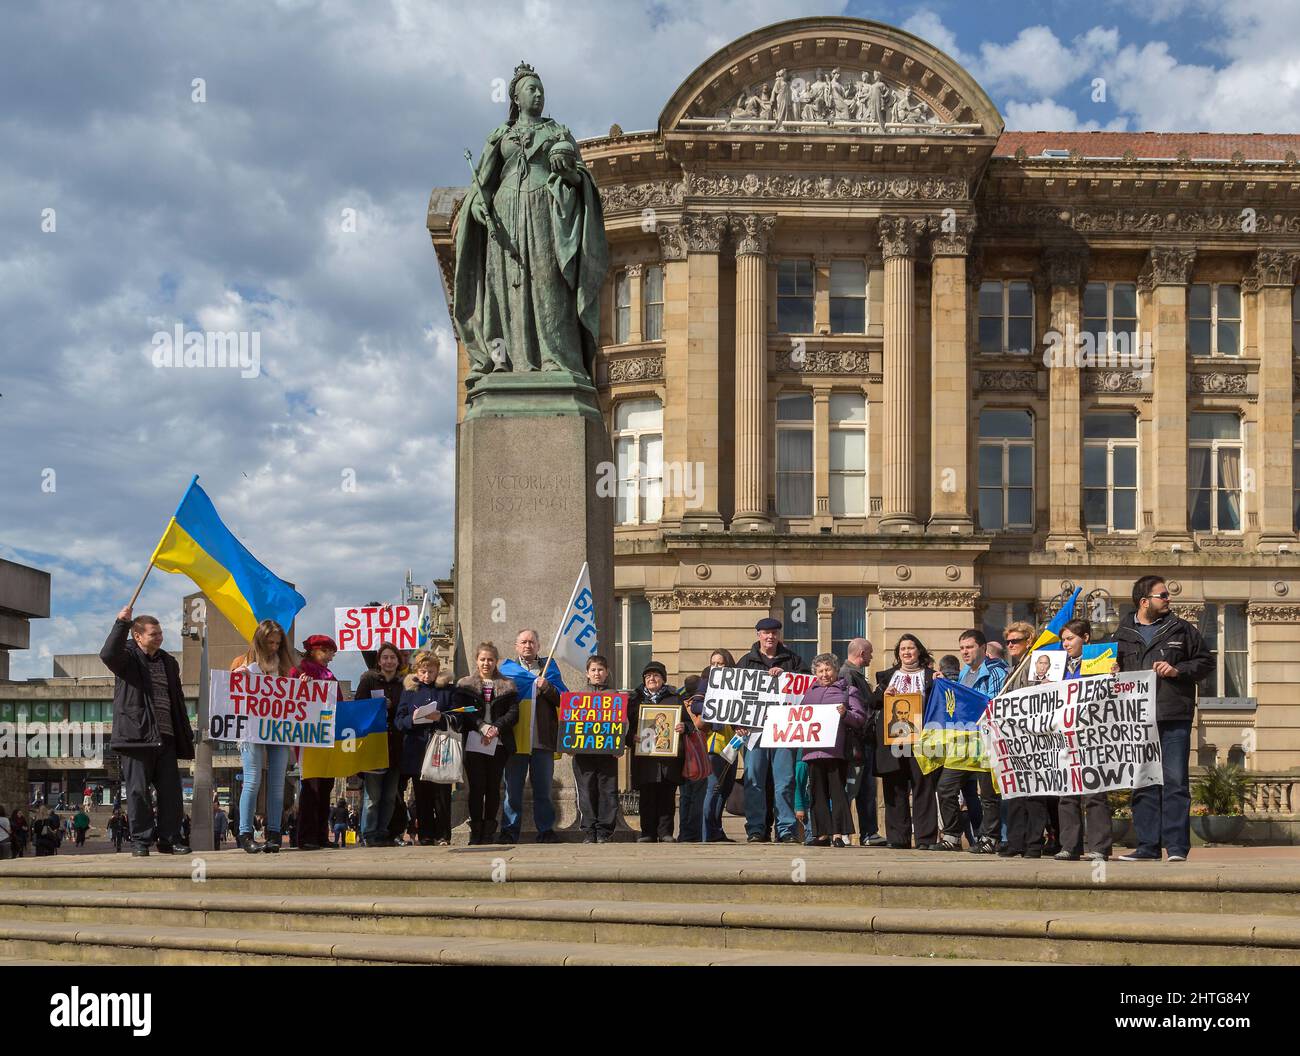 Demonstrators carrying the Ukrainian flag meet in Birmingham city centre to protest the invasion and annexation of Crimea by the Russian Federation. Stock Photo